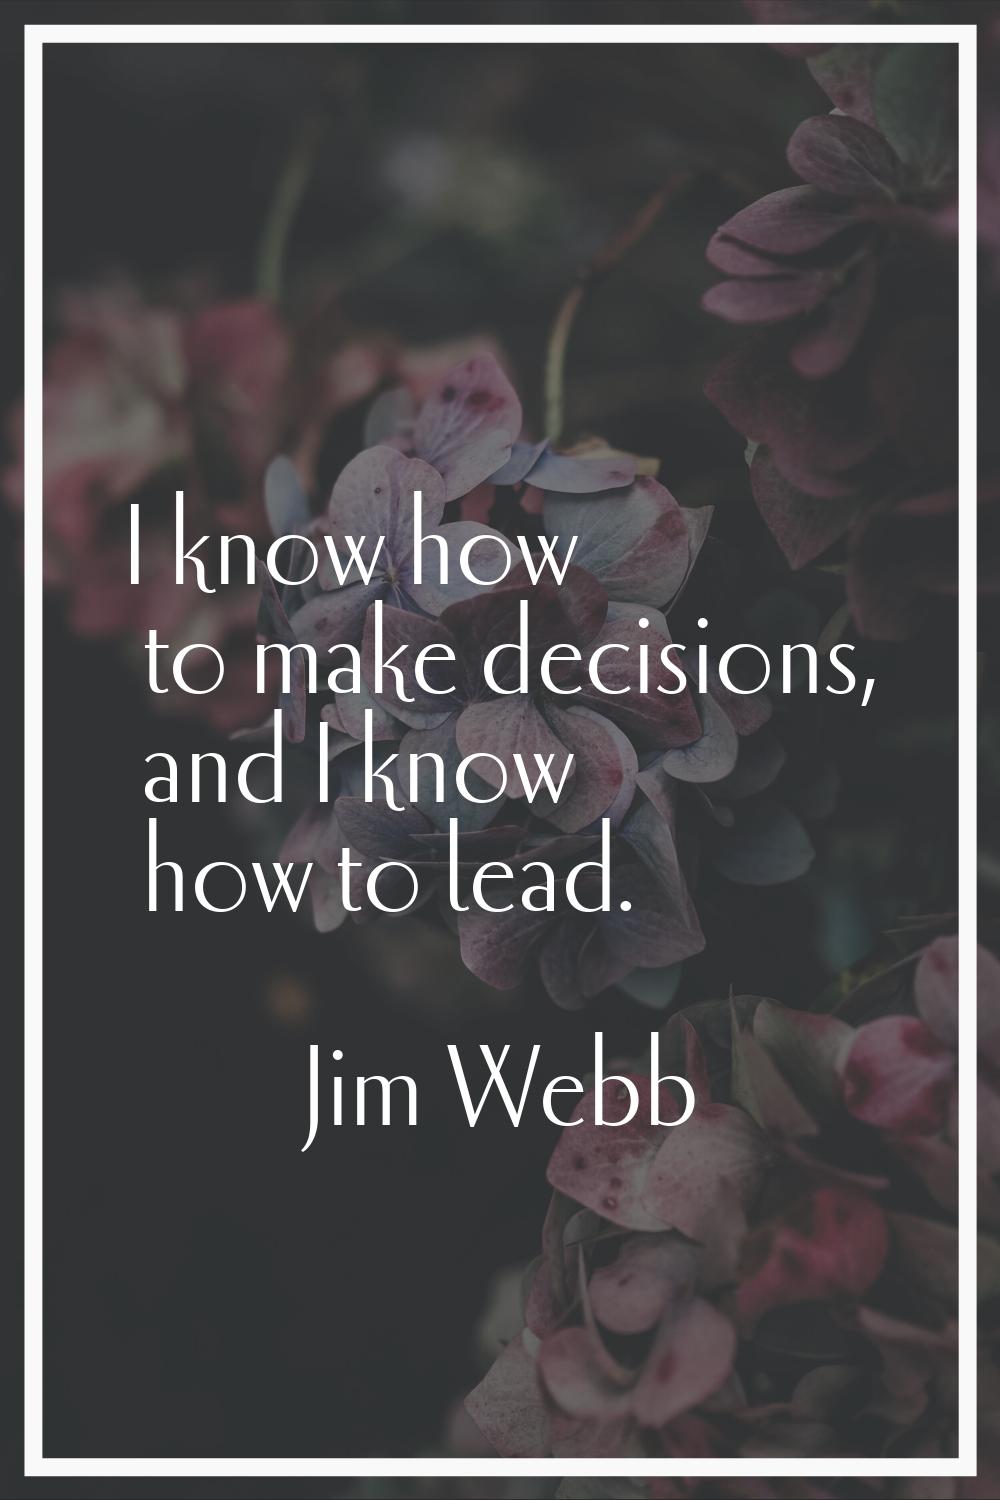 I know how to make decisions, and I know how to lead.